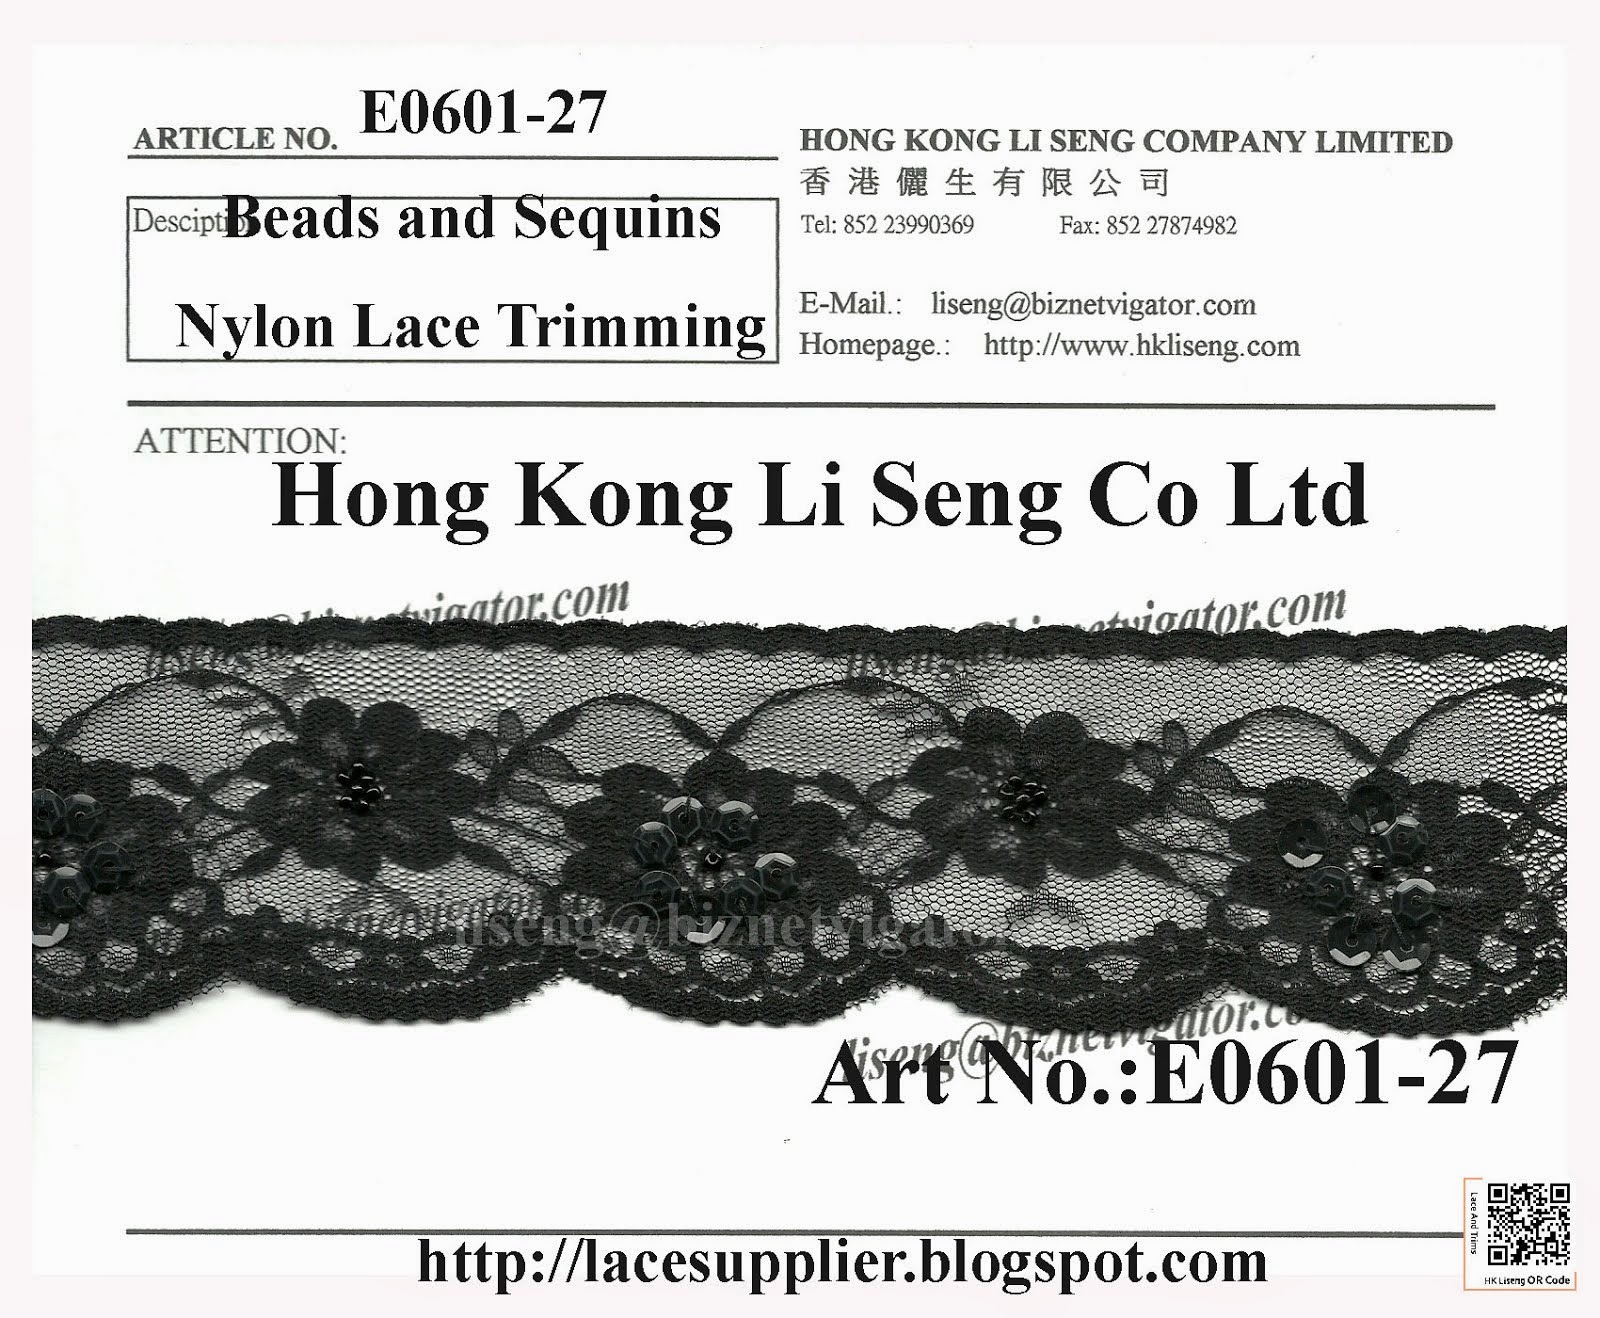 Nylon Lace Trimming With Beads and Sequins Manufacturer - Hong Kong Li Seng Co Ltd